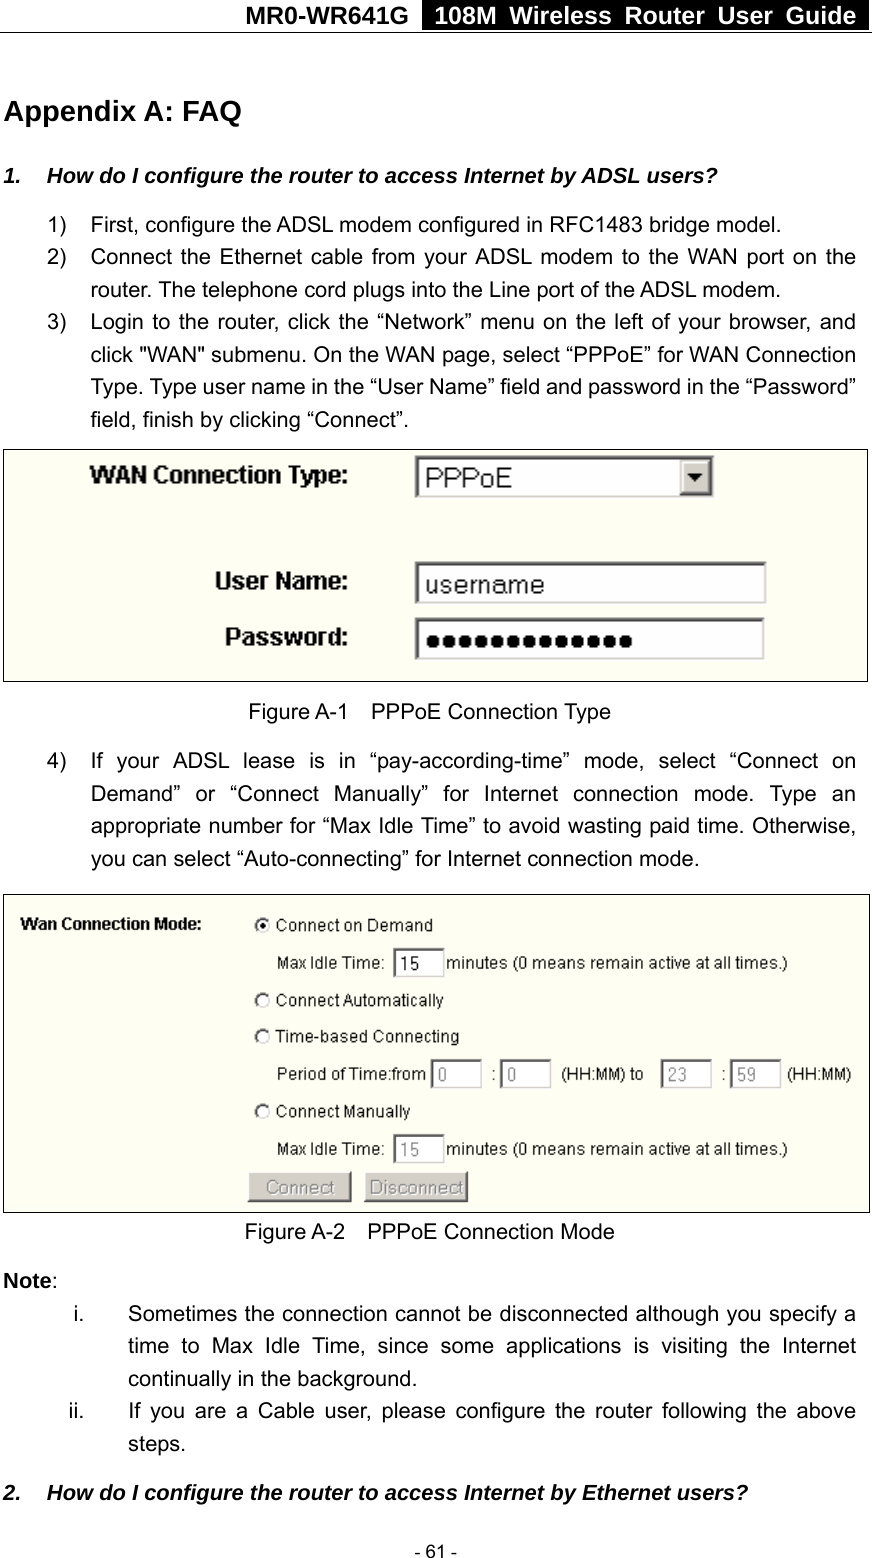 MR0-WR641G   108M Wireless Router User Guide  Appendix A: FAQ 1.  How do I configure the router to access Internet by ADSL users? 1)  First, configure the ADSL modem configured in RFC1483 bridge model. 2)  Connect the Ethernet cable from your ADSL modem to the WAN port on the router. The telephone cord plugs into the Line port of the ADSL modem. 3)  Login to the router, click the “Network” menu on the left of your browser, and click &quot;WAN&quot; submenu. On the WAN page, select “PPPoE” for WAN Connection Type. Type user name in the “User Name” field and password in the “Password” field, finish by clicking “Connect”.  Figure A-1  PPPoE Connection Type 4)  If your ADSL lease is in “pay-according-time” mode, select “Connect on Demand” or “Connect Manually” for Internet connection mode. Type an appropriate number for “Max Idle Time” to avoid wasting paid time. Otherwise, you can select “Auto-connecting” for Internet connection mode.  Figure A-2  PPPoE Connection Mode Note:  i.  Sometimes the connection cannot be disconnected although you specify a time to Max Idle Time, since some applications is visiting the Internet continually in the background. ii.  If you are a Cable user, please configure the router following the above steps. 2.  How do I configure the router to access Internet by Ethernet users?  - 61 - 